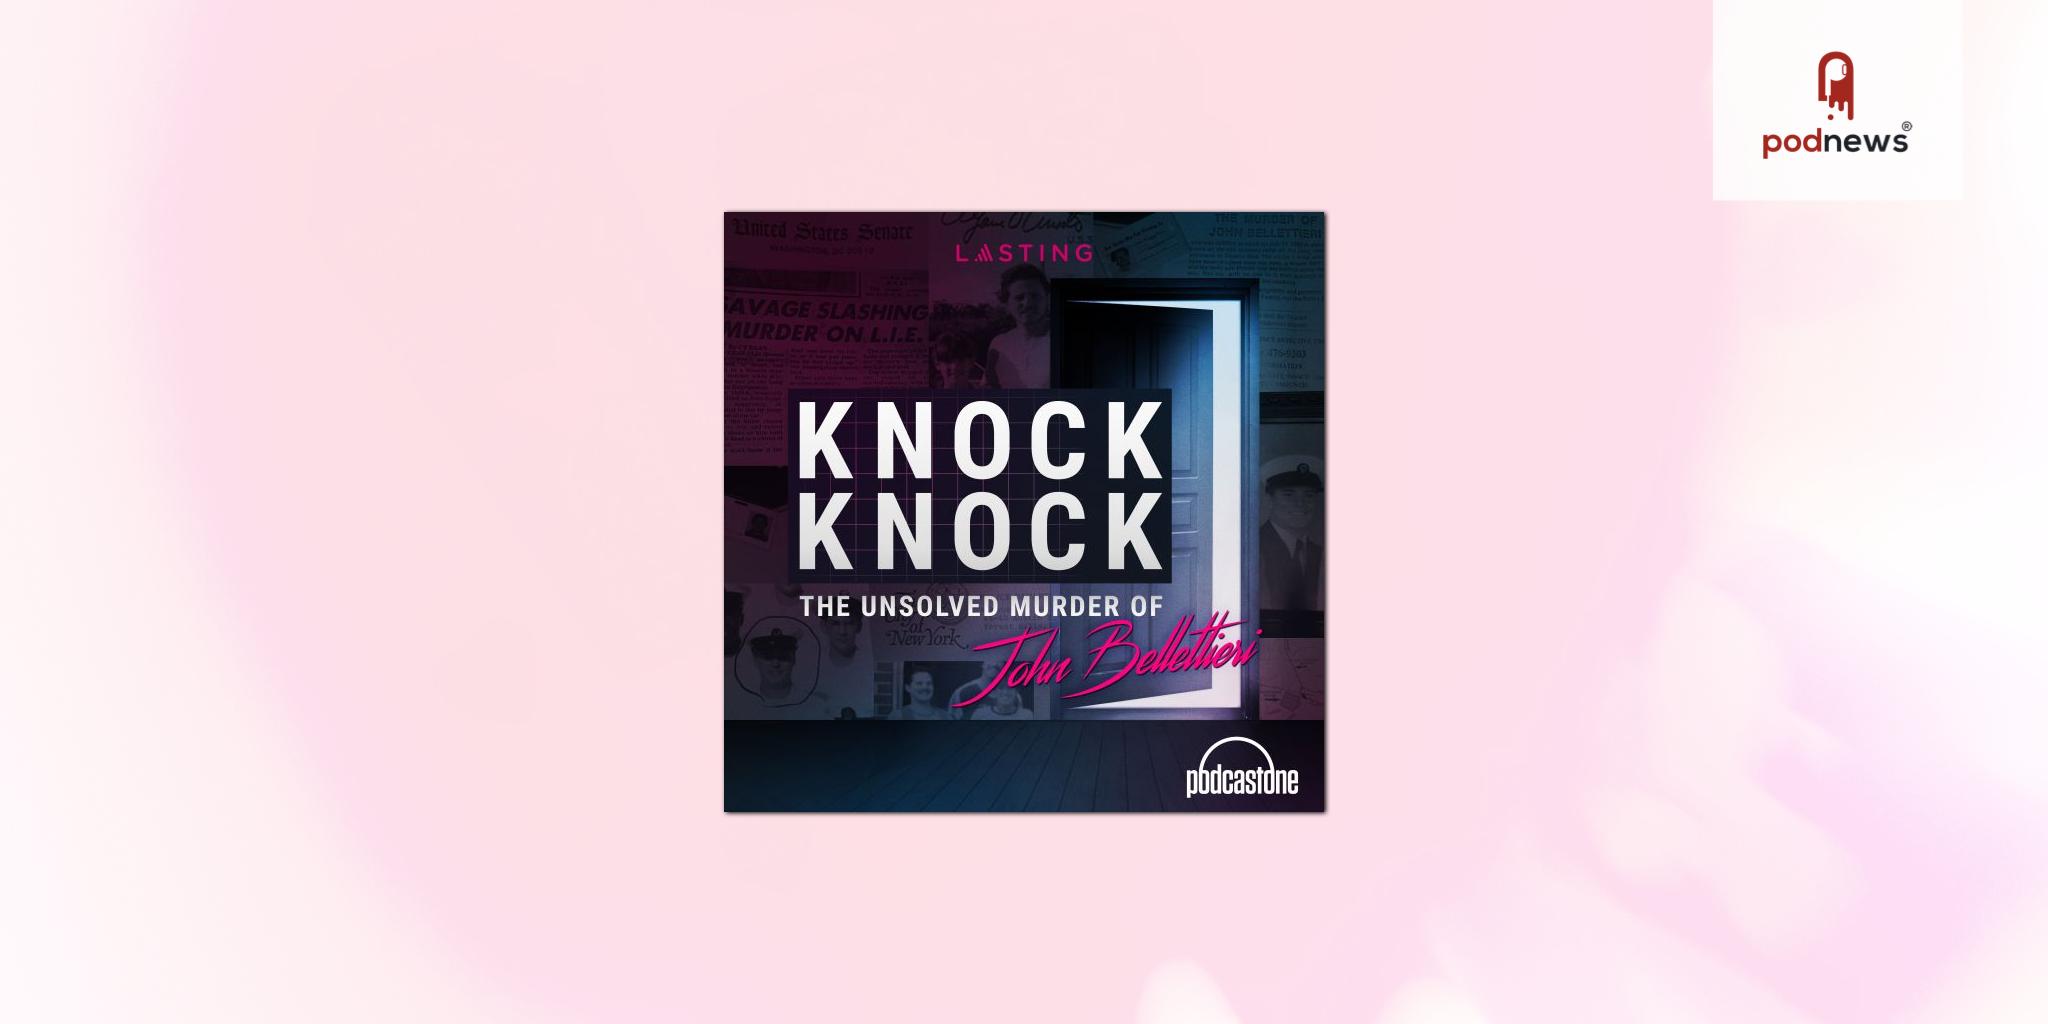 PodcastOne crowns True Crime Podcast Knock Knock as the winner of Self Made Podcast Edition